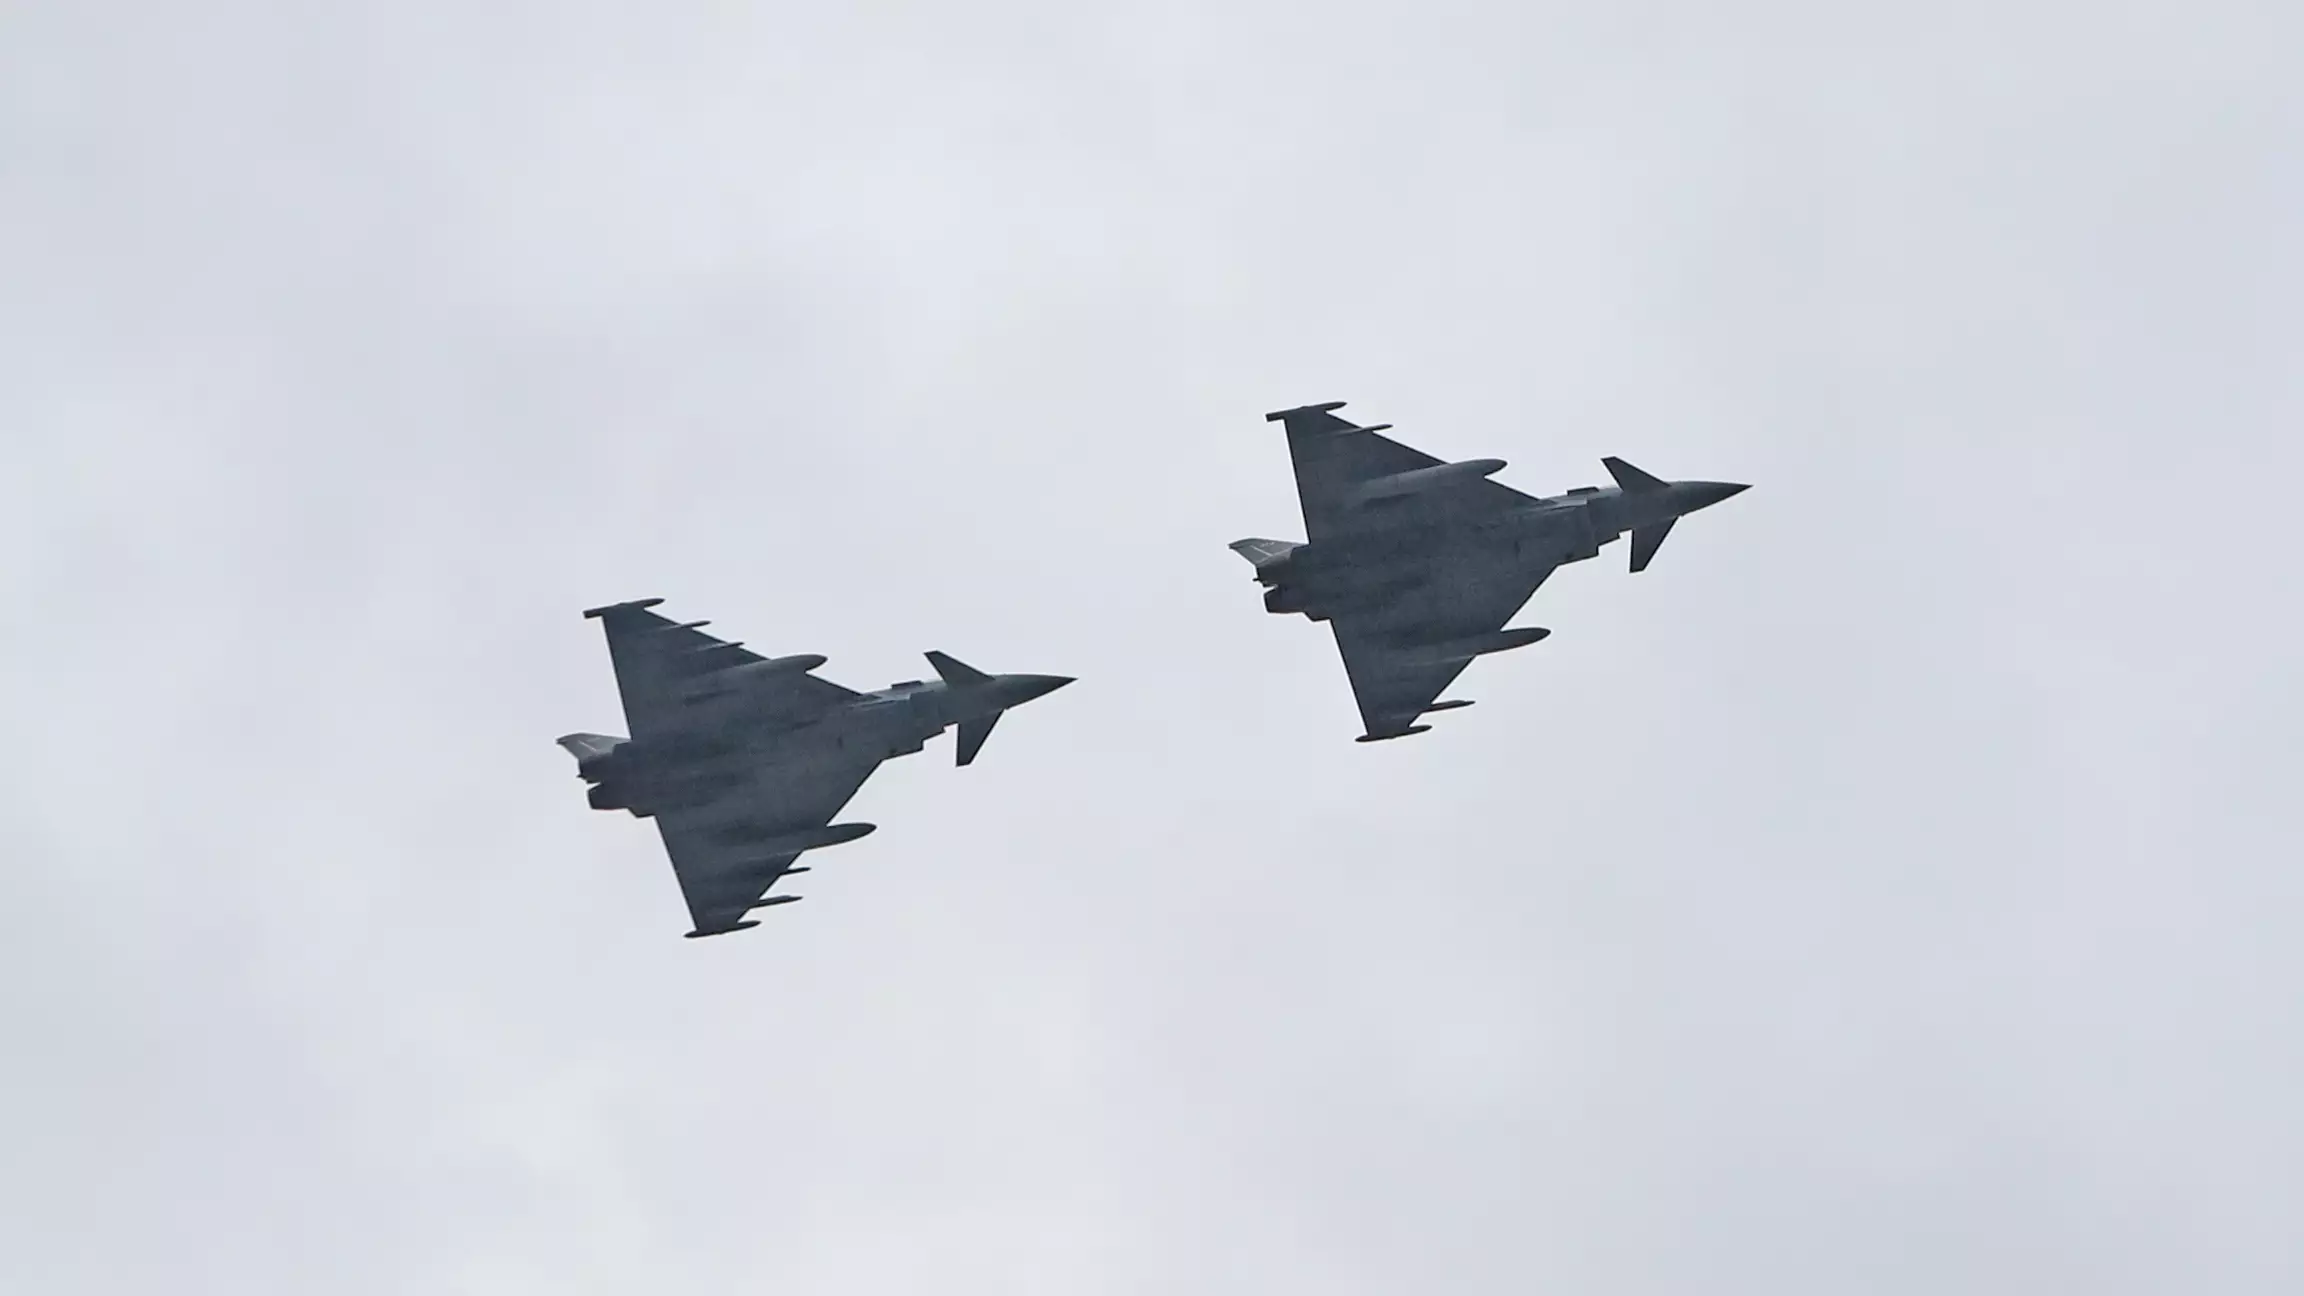 Sonic Boom Heard Over London And Cambridge After Fighter Jets Scrambled